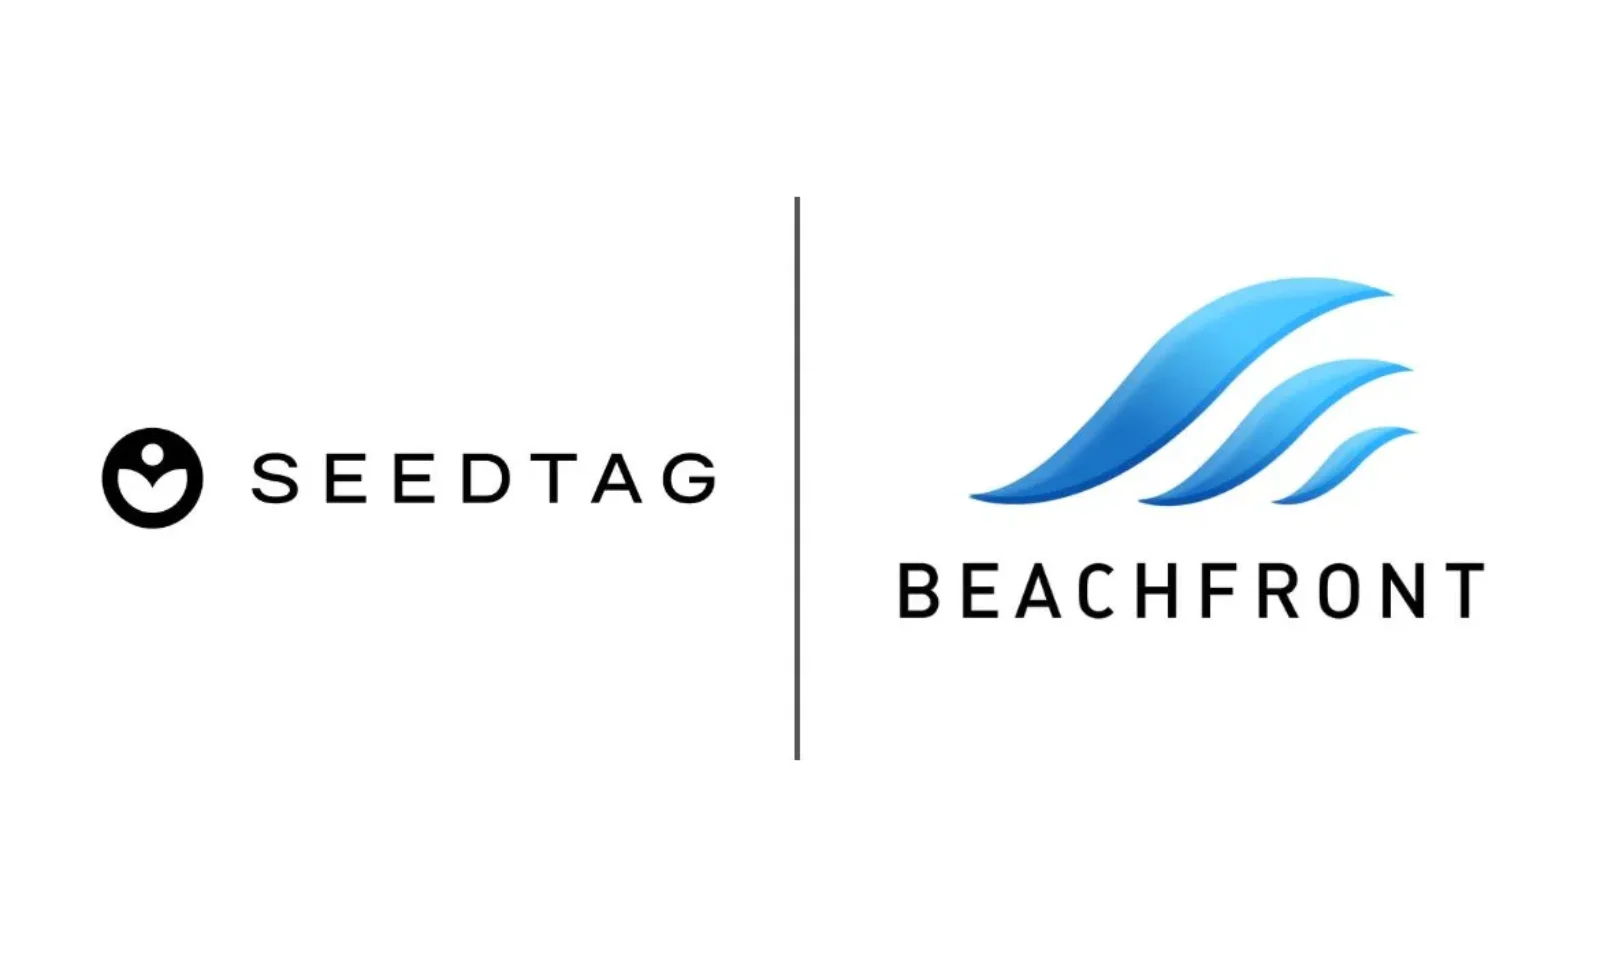 Seedtag, Beachfront, contextual advertising, CTV, streaming, AI, privacy-first, ad spend, eMarketer, media buyers, publishers, advertising technology, ad platform, digital ads,